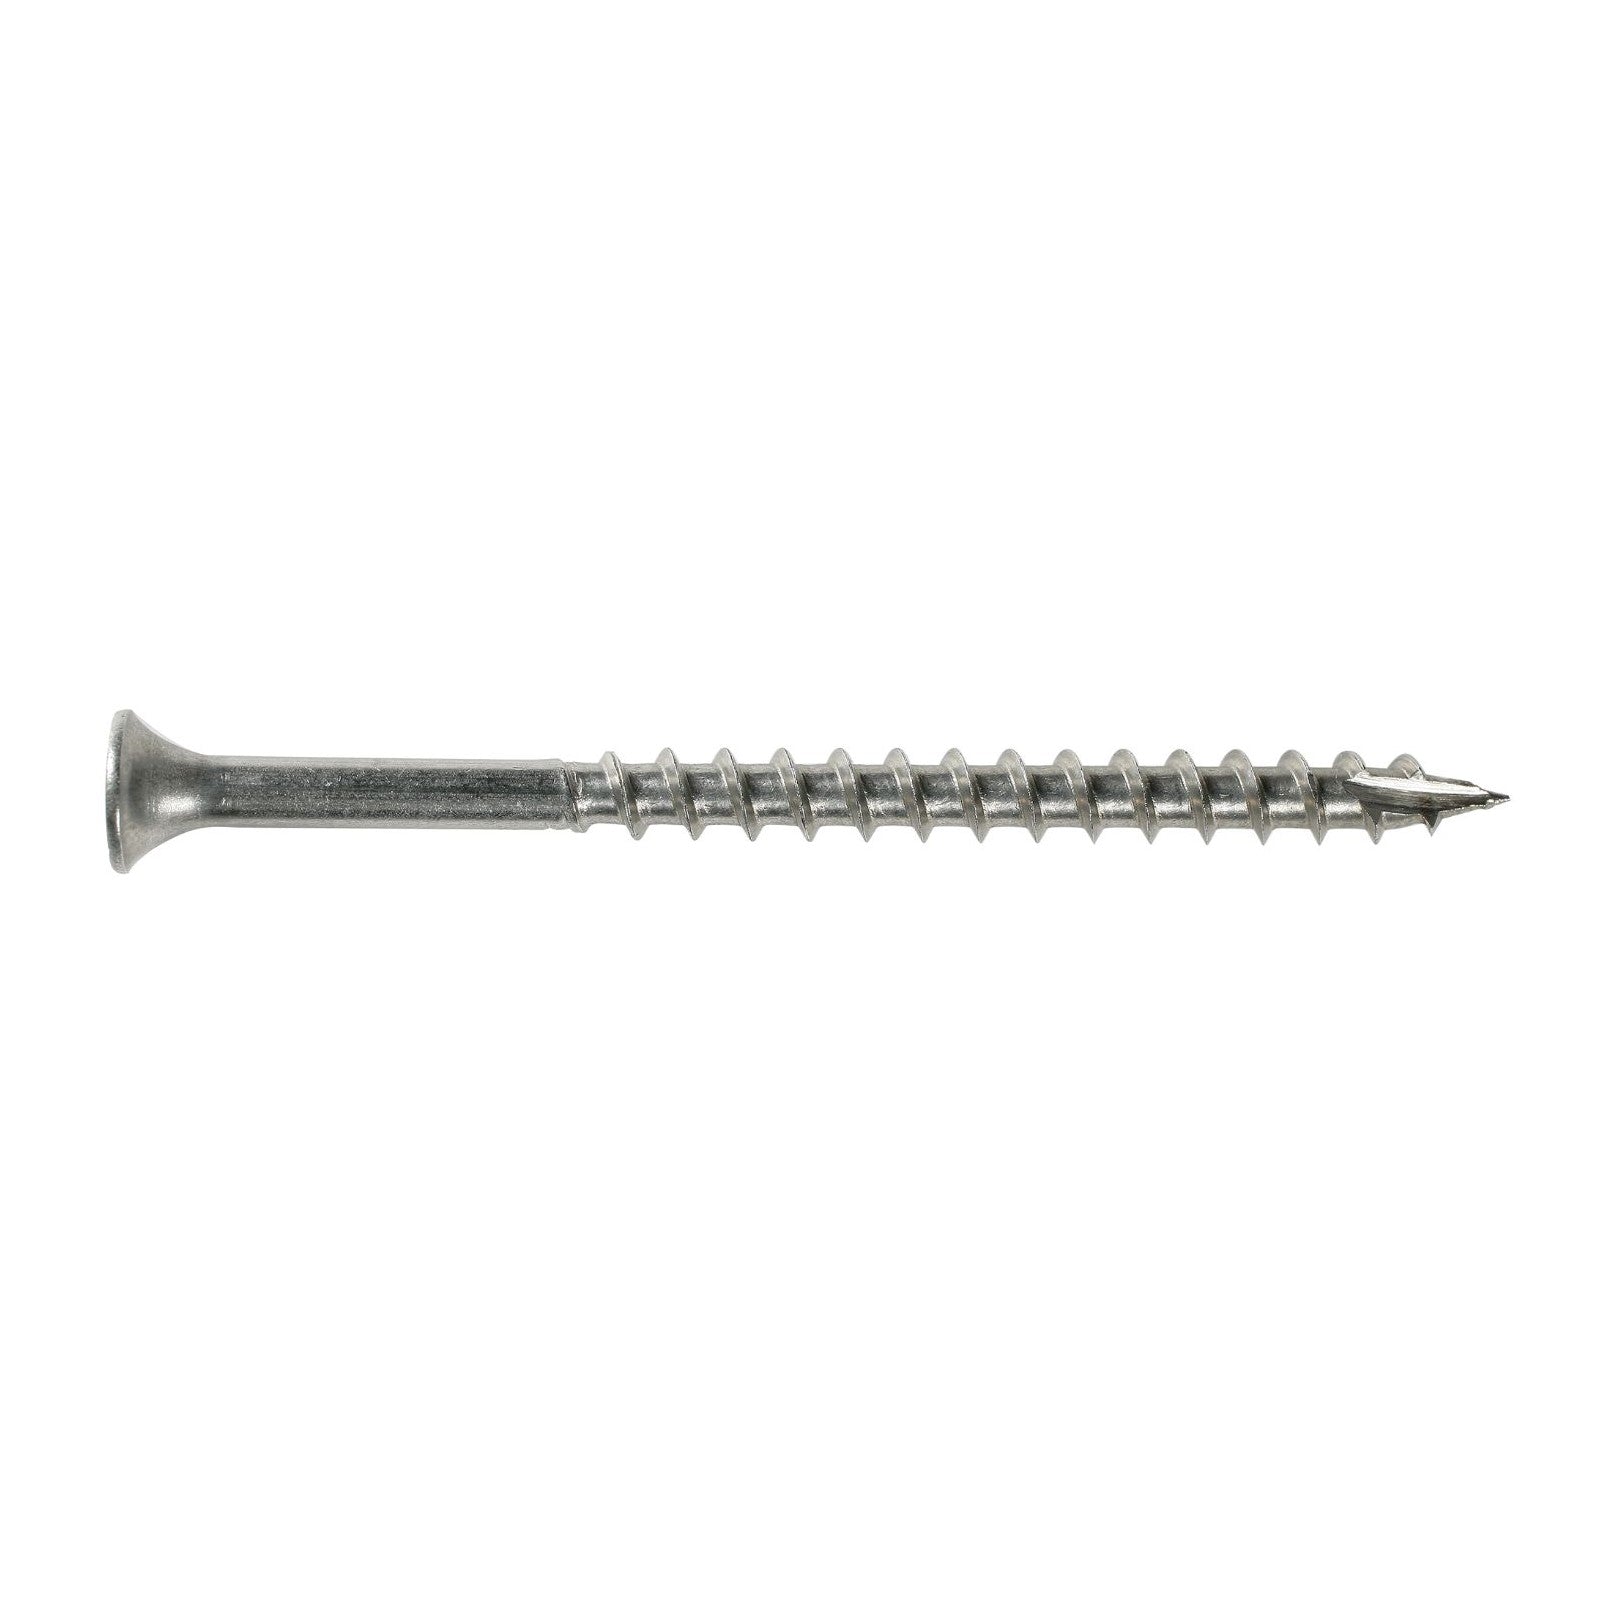 #8 x 158 inch 316 Stainless #2 Square Drive Deck Screw Pkg 4000